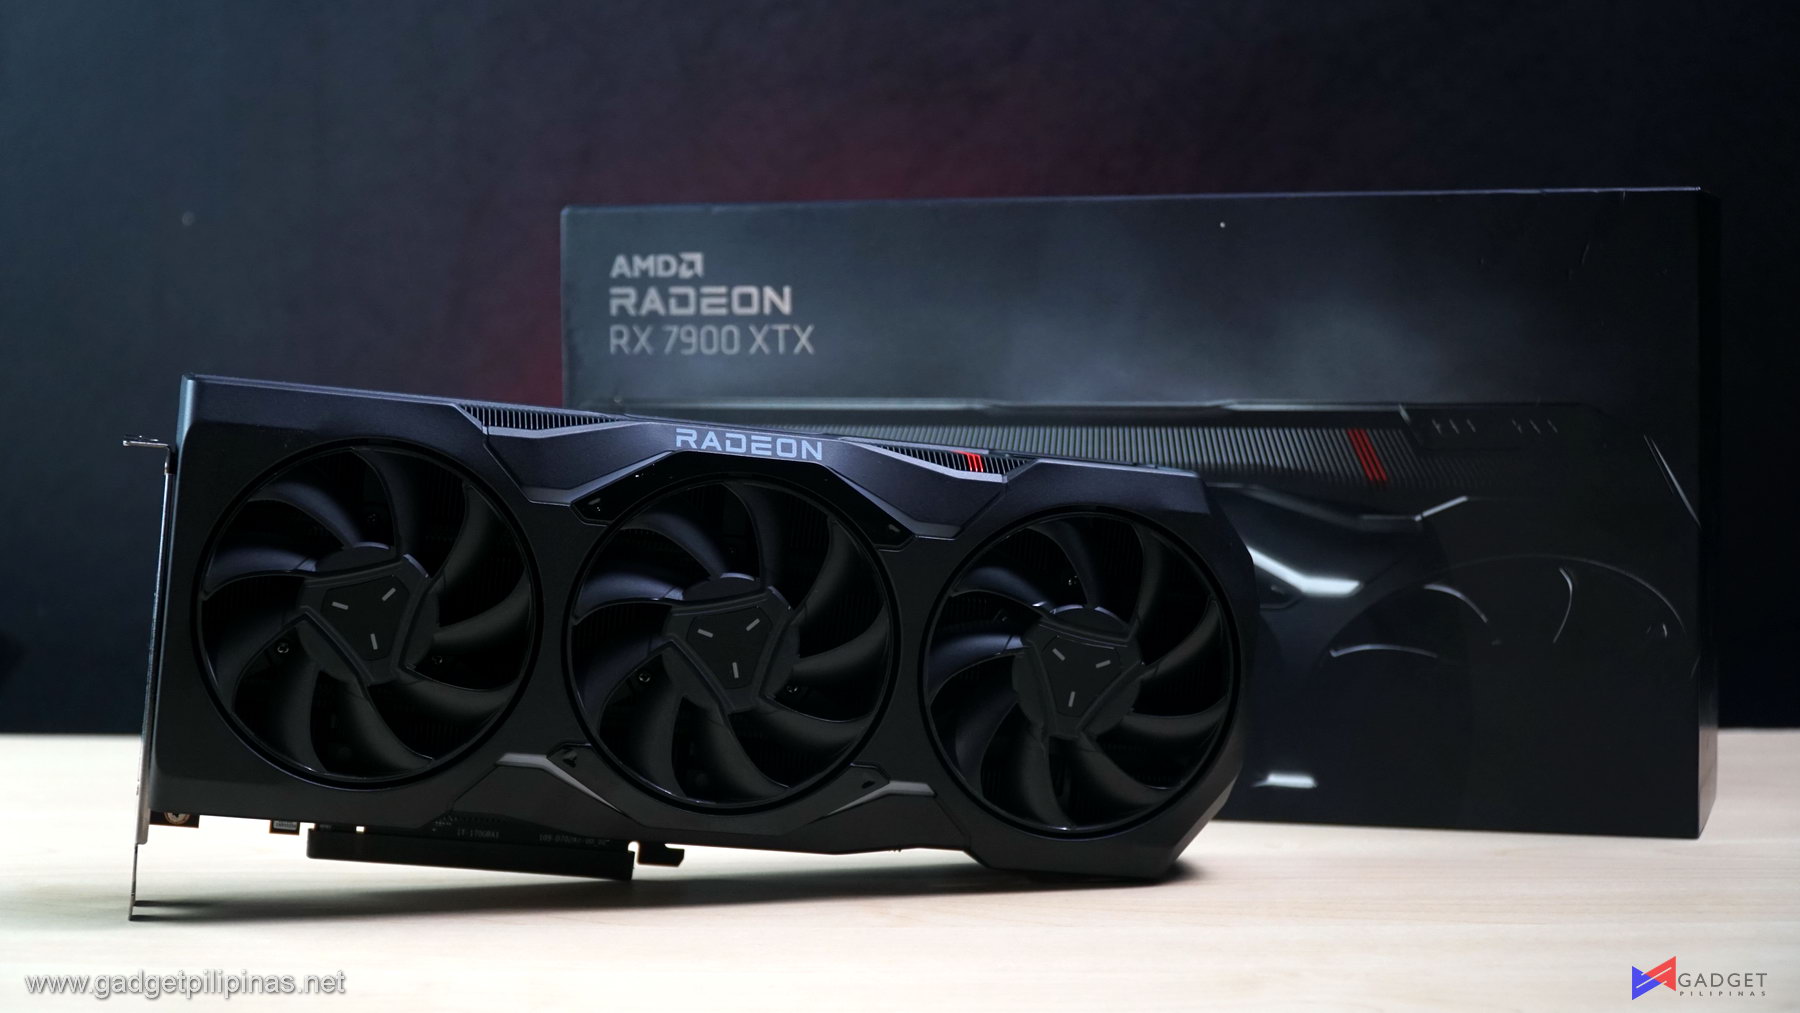 AMD Radeon RX 7900 XTX Graphics Card Review - The Better Choice? (Updated)